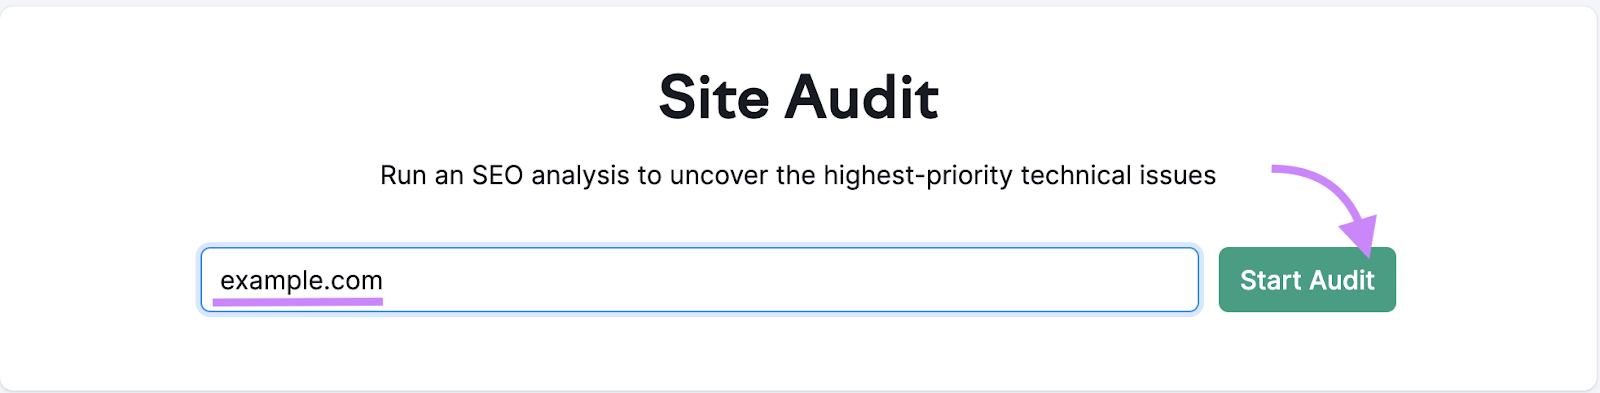 "example.com" entered into Start Audit search bar